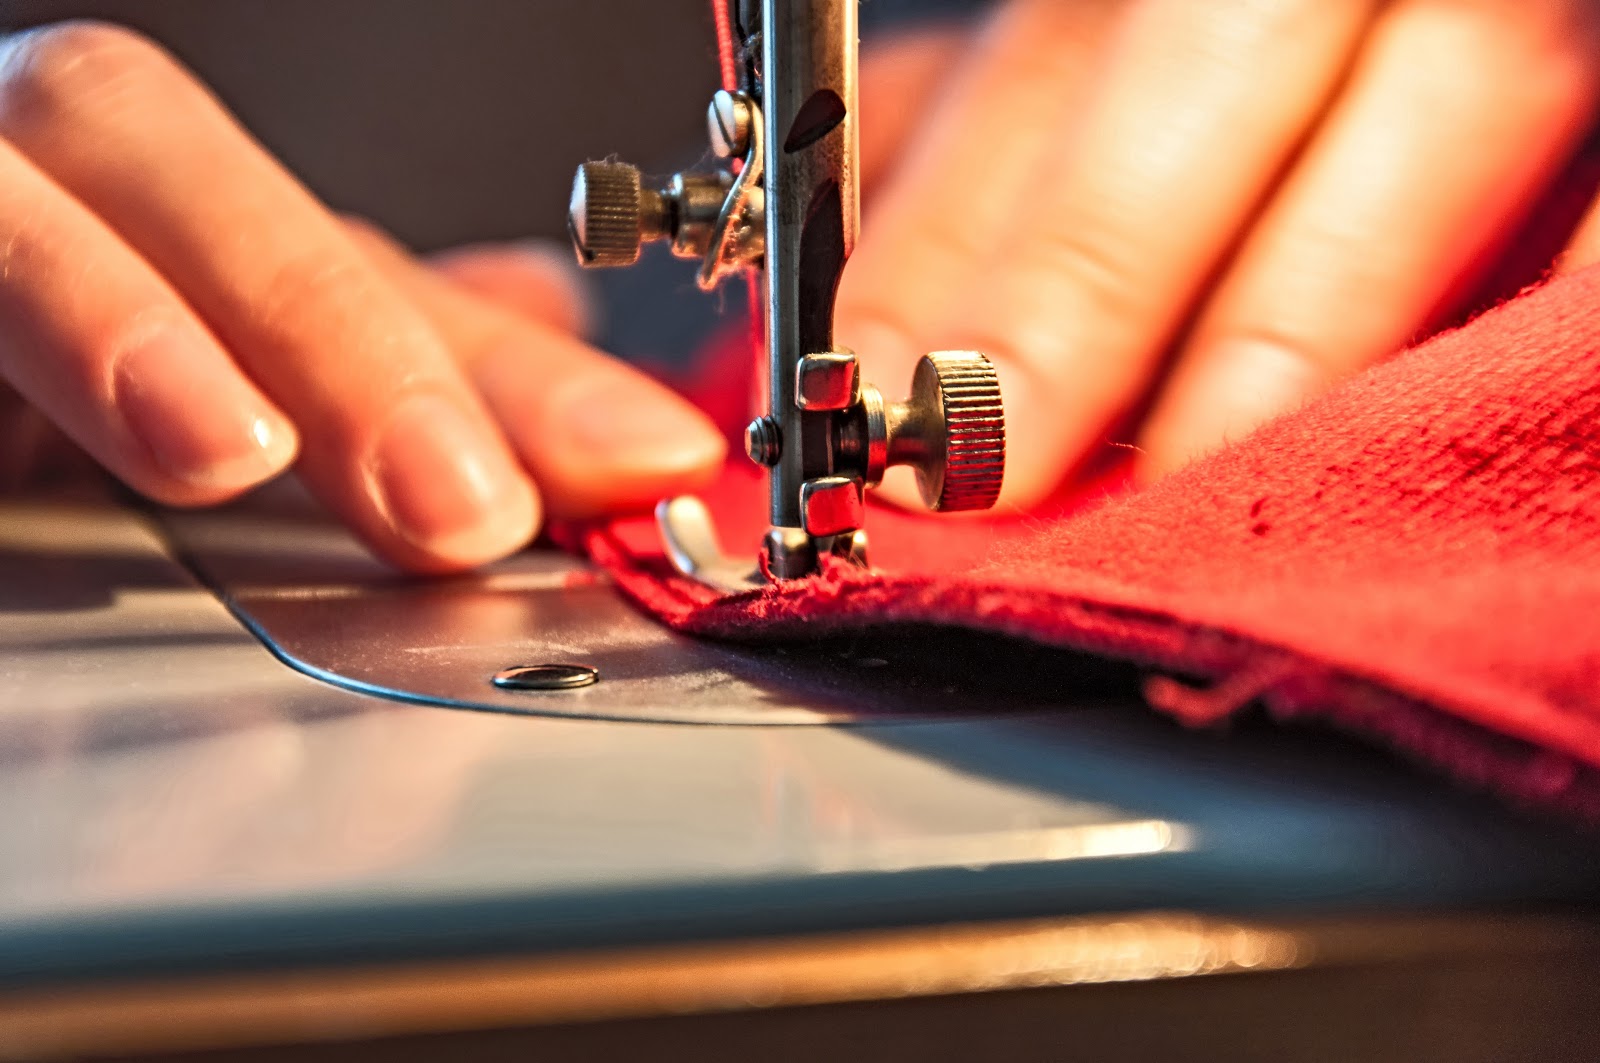 sewing machine on red fabric